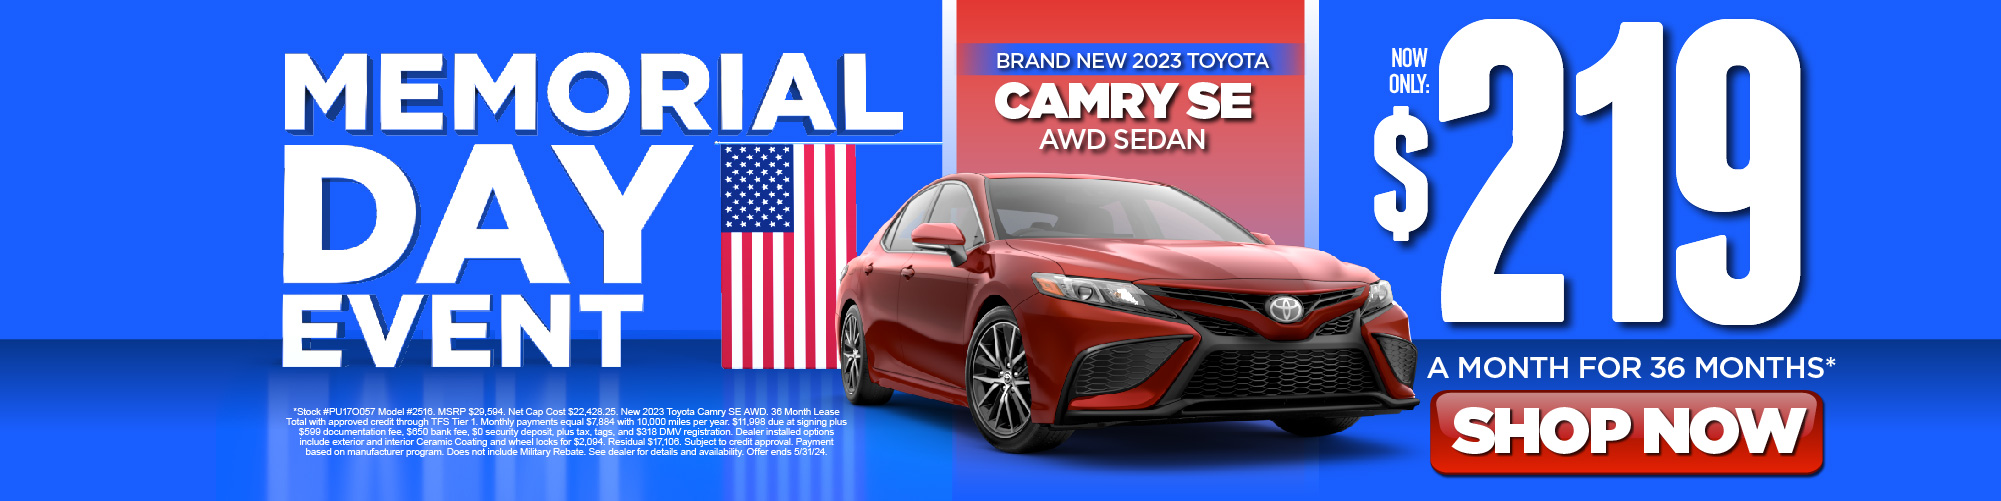 PRE OWNED SPECIAL USED 2021 Toyota Camry LE Sedan | $289 a month for 36 months*